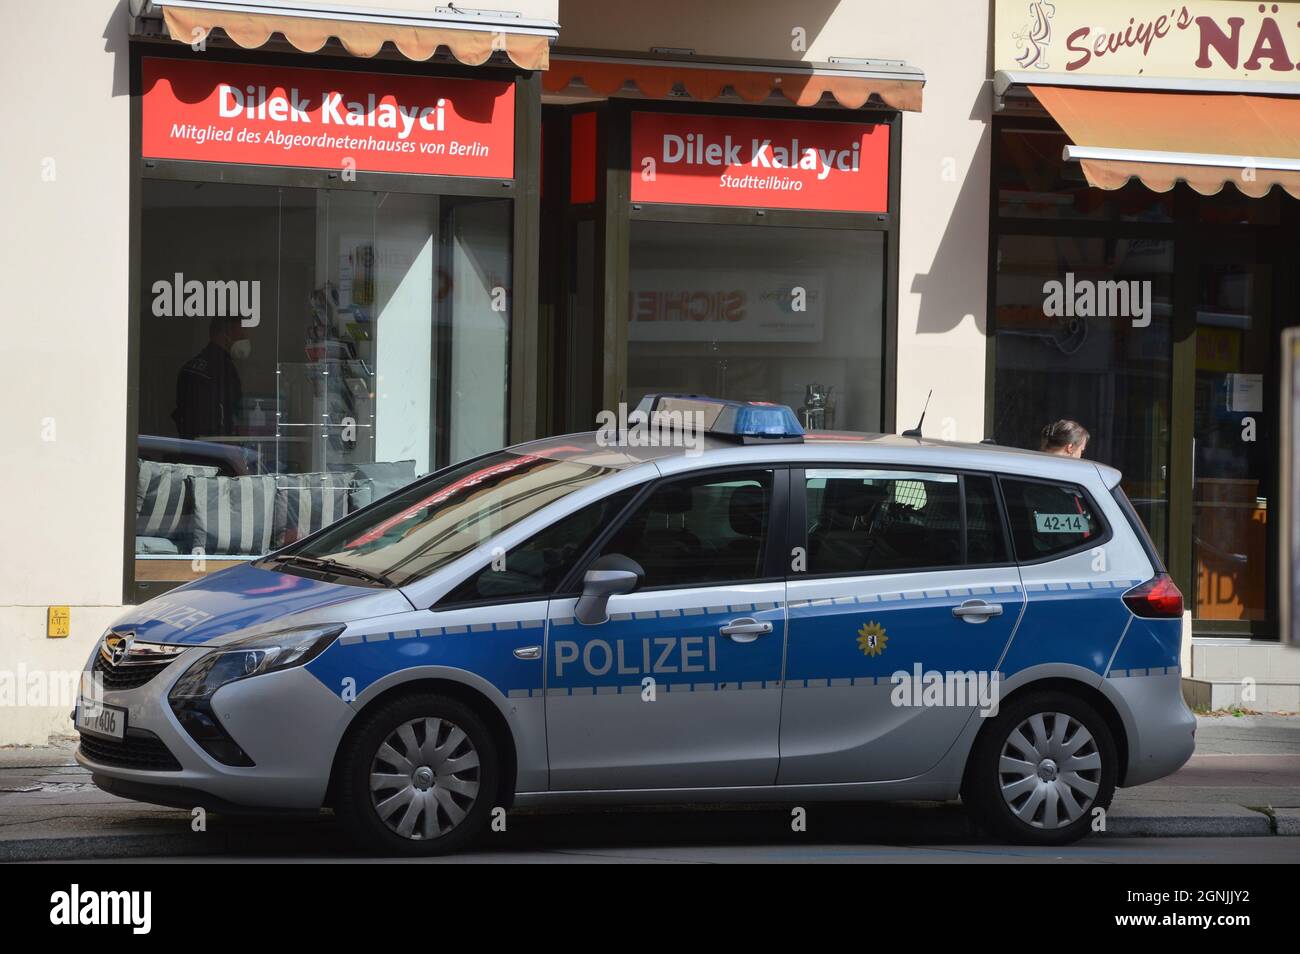 District office of State Minister Dilek Kalayci under police protection at Schmiljanstrasse in Friedenau, Berlin, Germany - September 22, 2021. Stock Photo